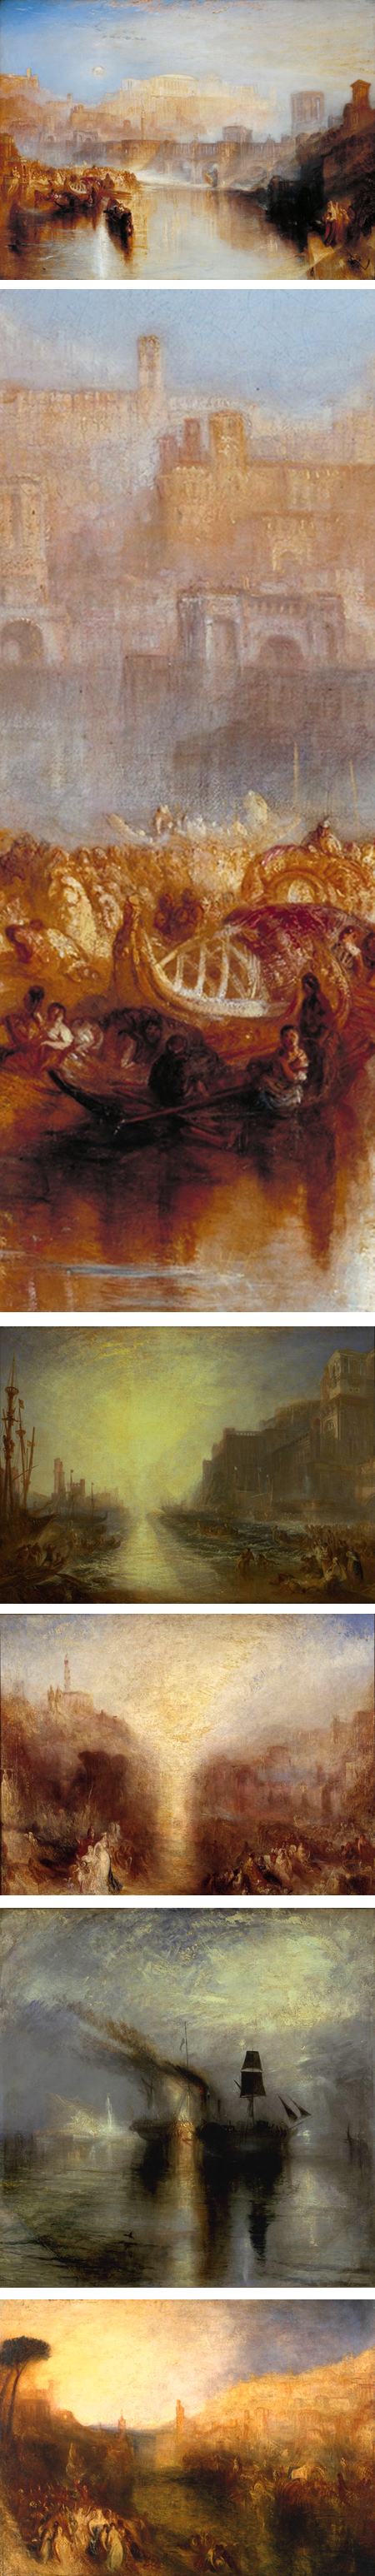 J.M.W. Turner, The EY Exhibition: Late Turner – Painting Set Free, Ancient Rome; Agrippina Landing with the Ashes of Germanicus